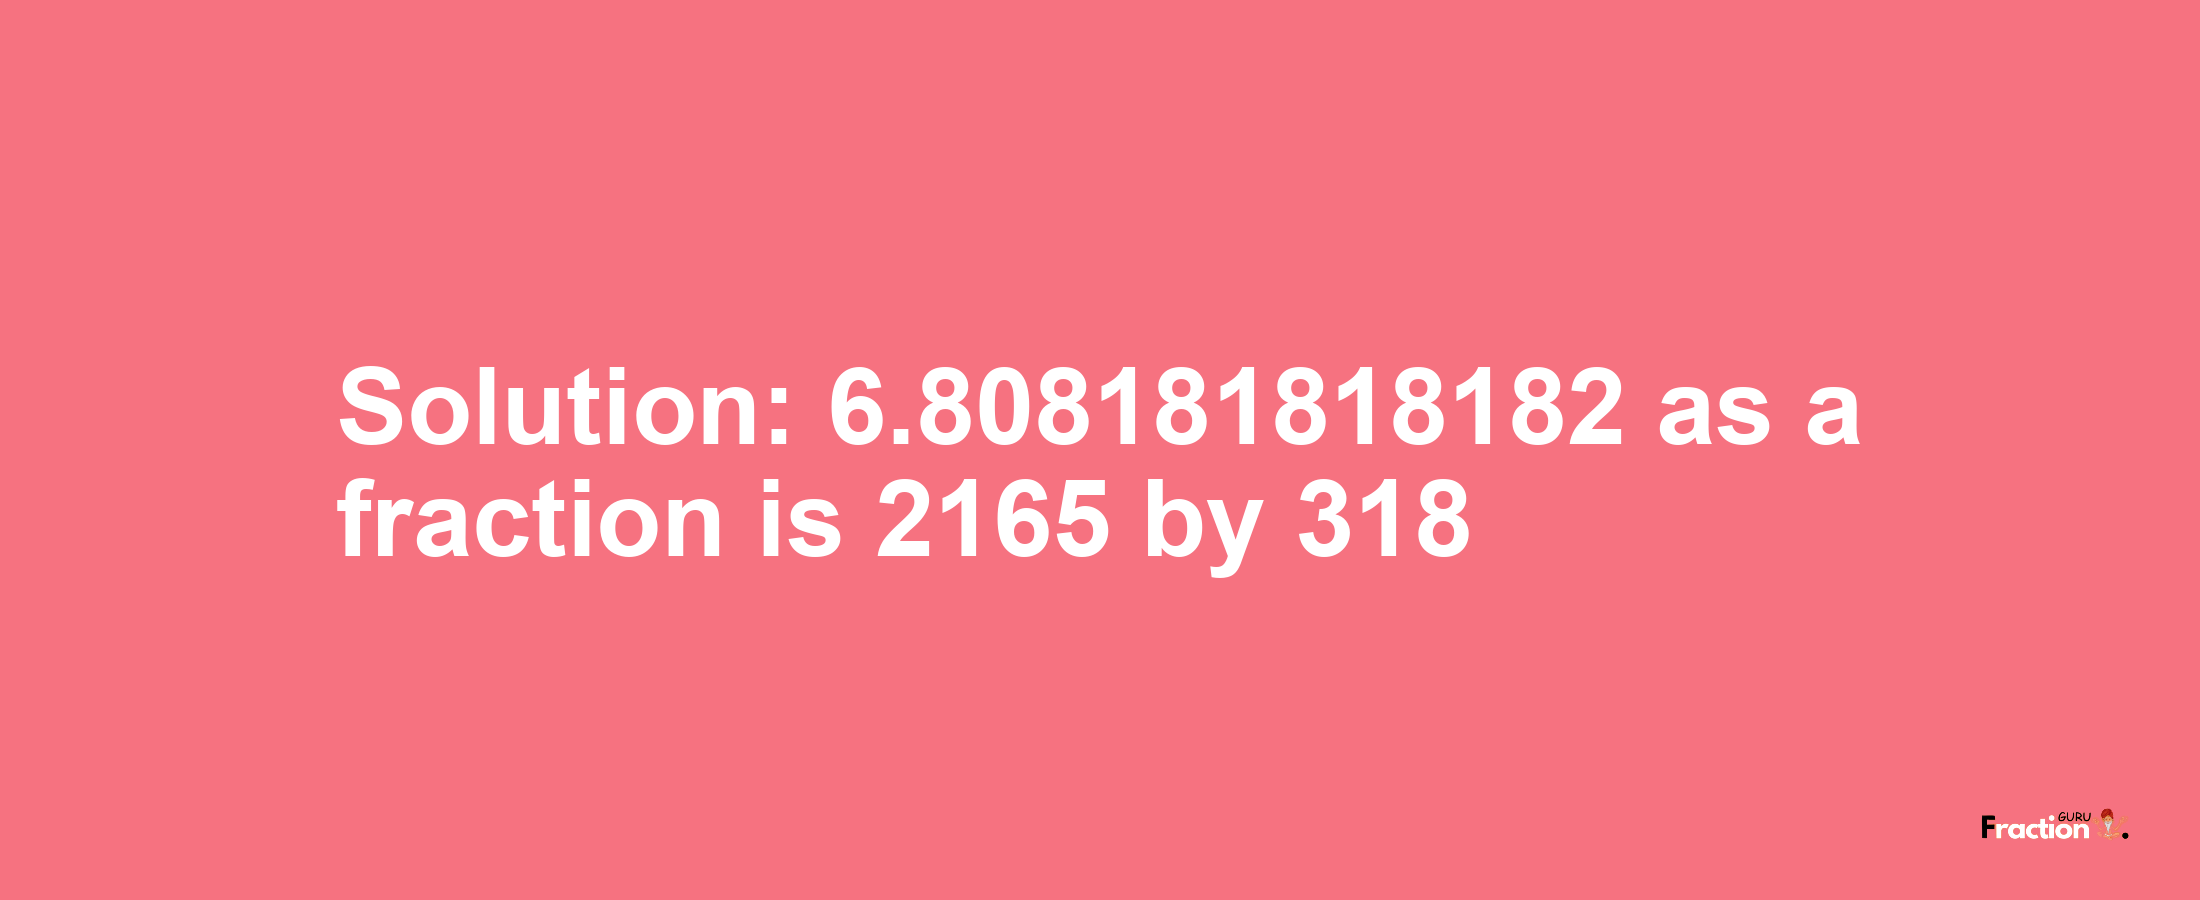 Solution:6.808181818182 as a fraction is 2165/318